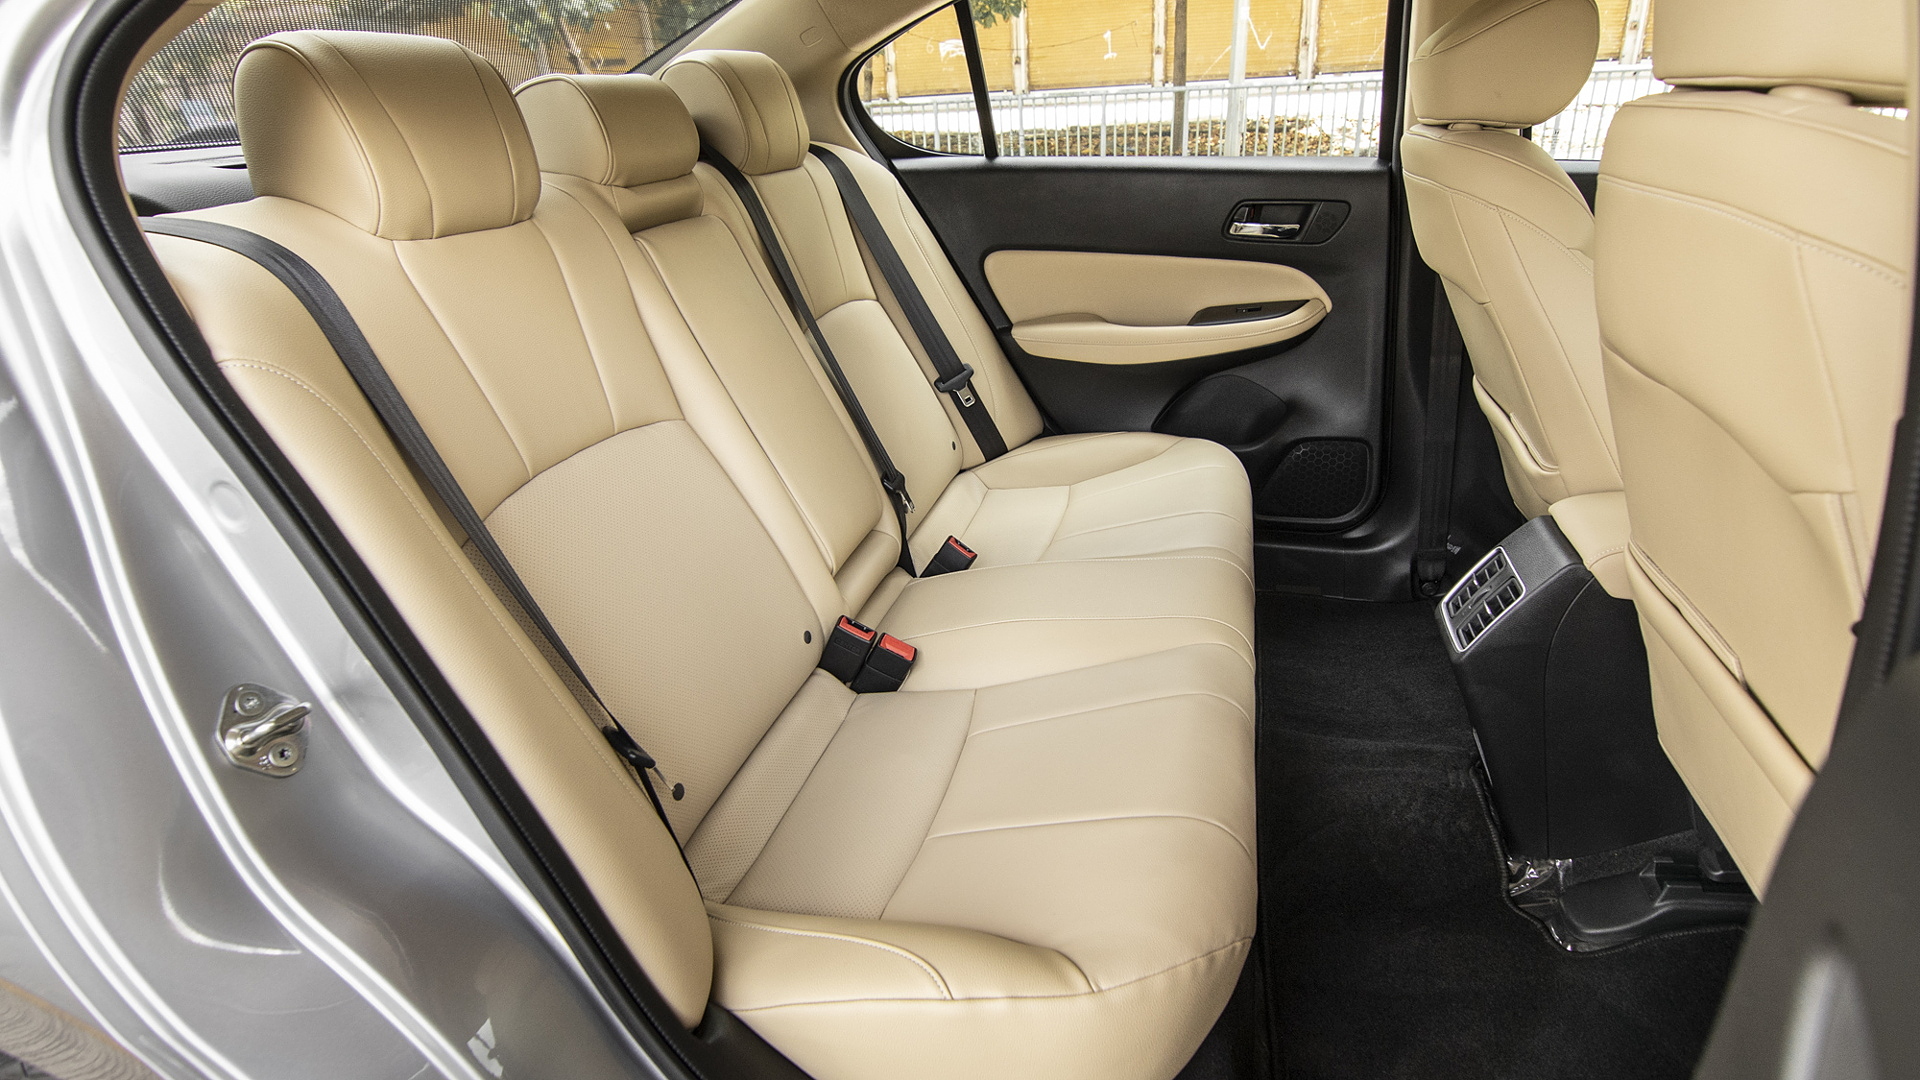 Honda All New City Images Interior Exterior Photo Gallery 500 Images Carwale